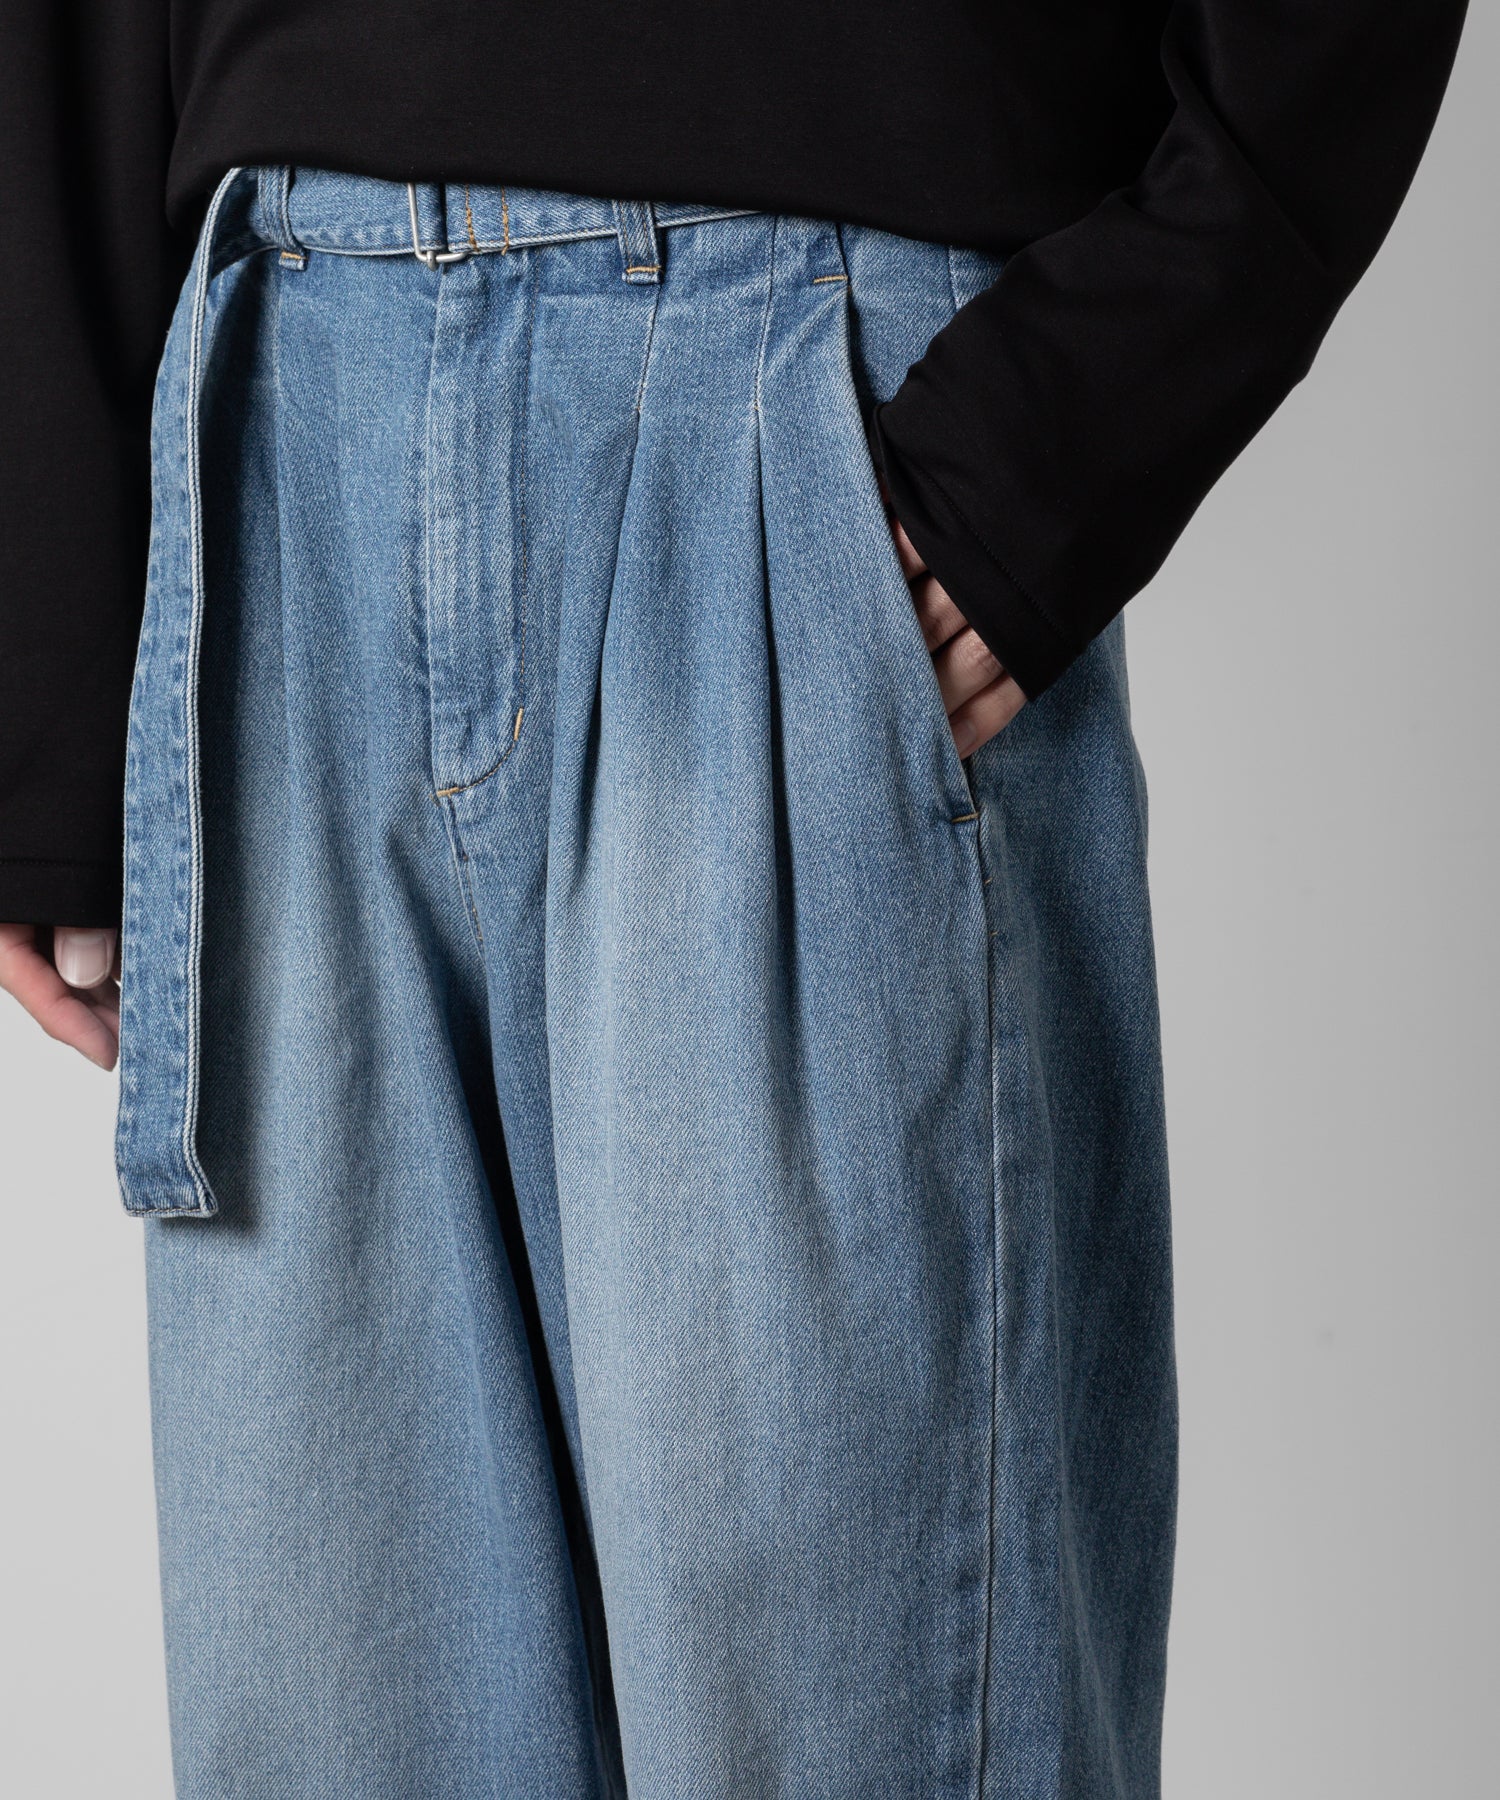 【ATTACHMENT】ATTACHMENT アタッチメントの11oz DENIM BELTED TAPERED FIT TROUSERS - NAVY 公式通販サイトsession福岡セレクトショップ